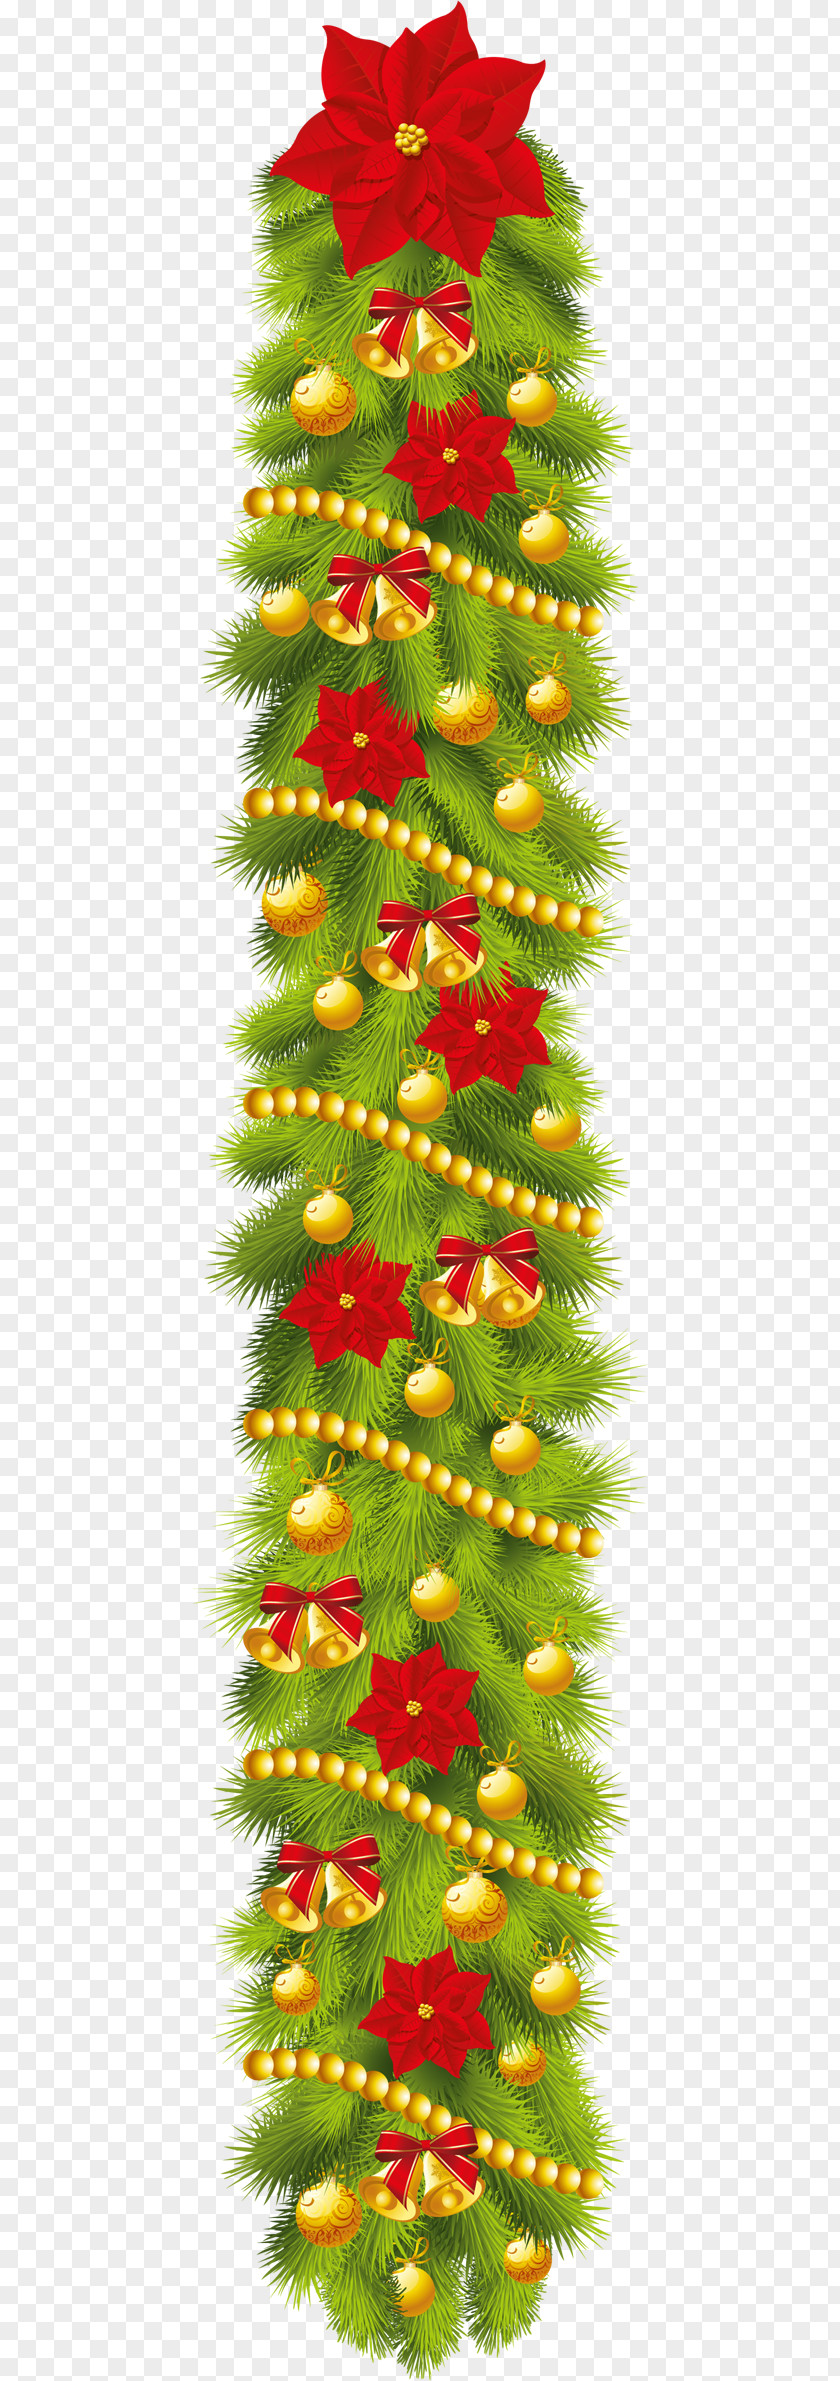 Pine Cone Garland Christmas Ornament Clip Art PNG